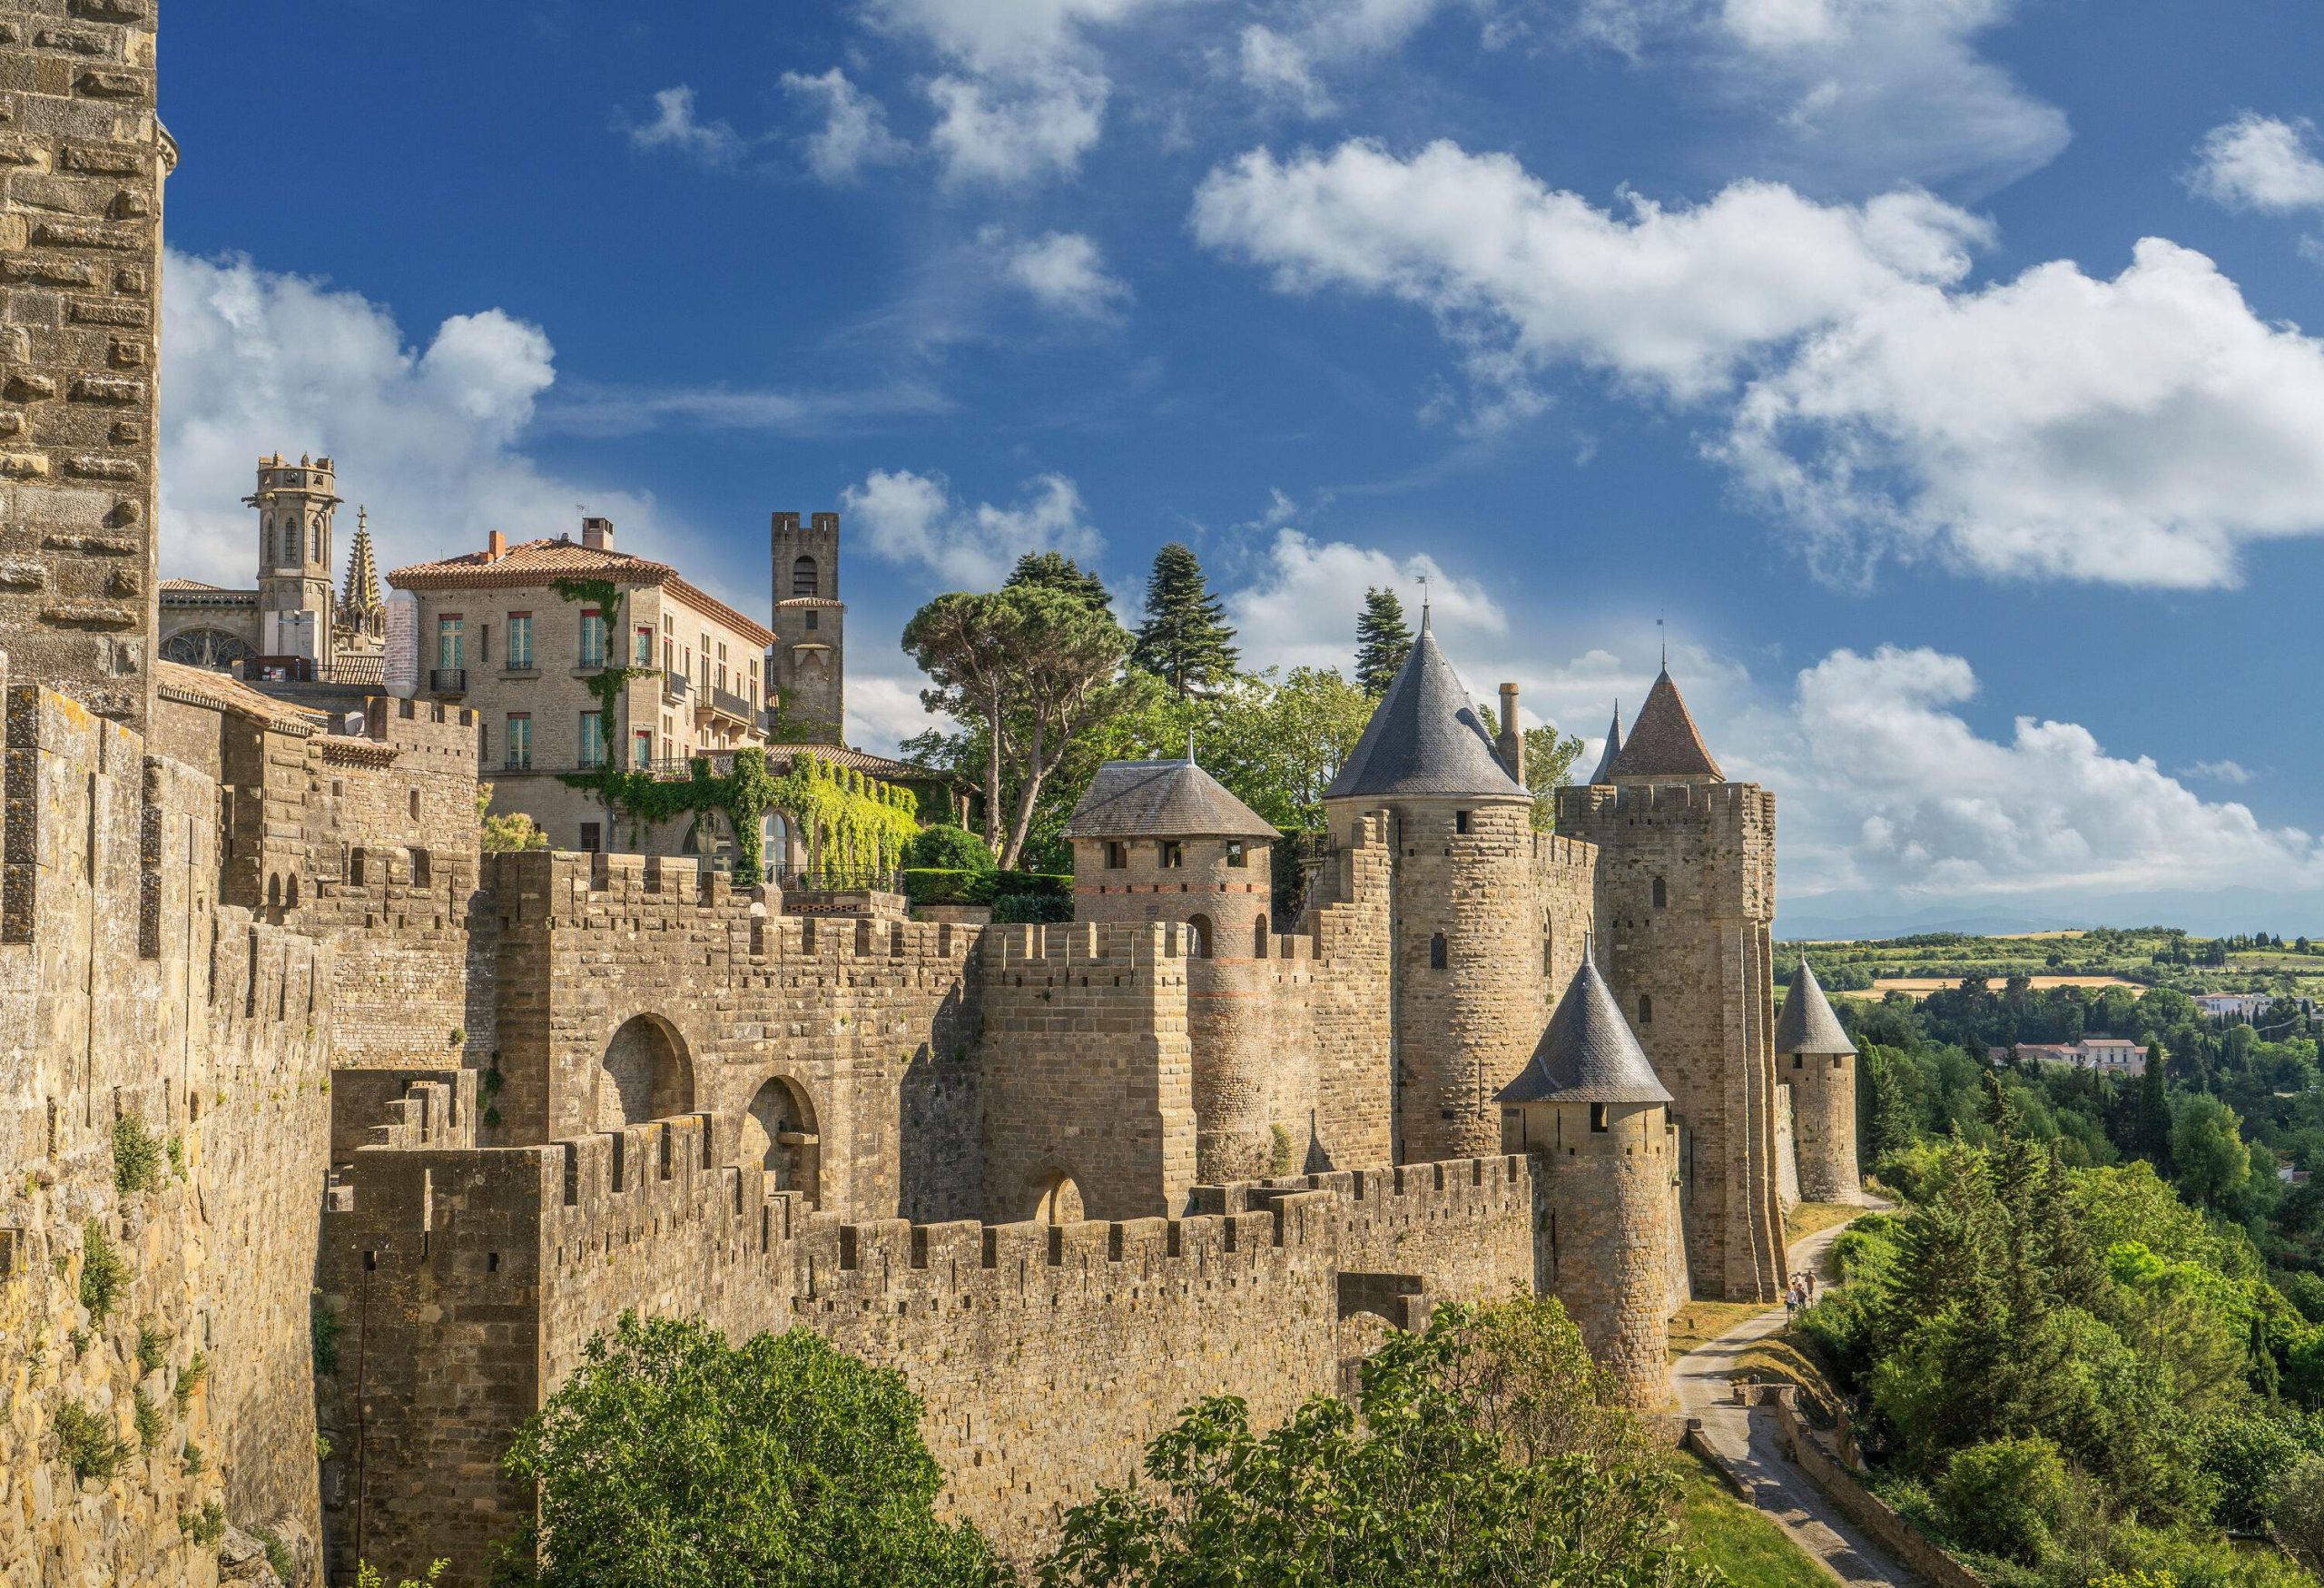 A multilayered wall with towers of a castle alongside a promenade on a lush green hill.